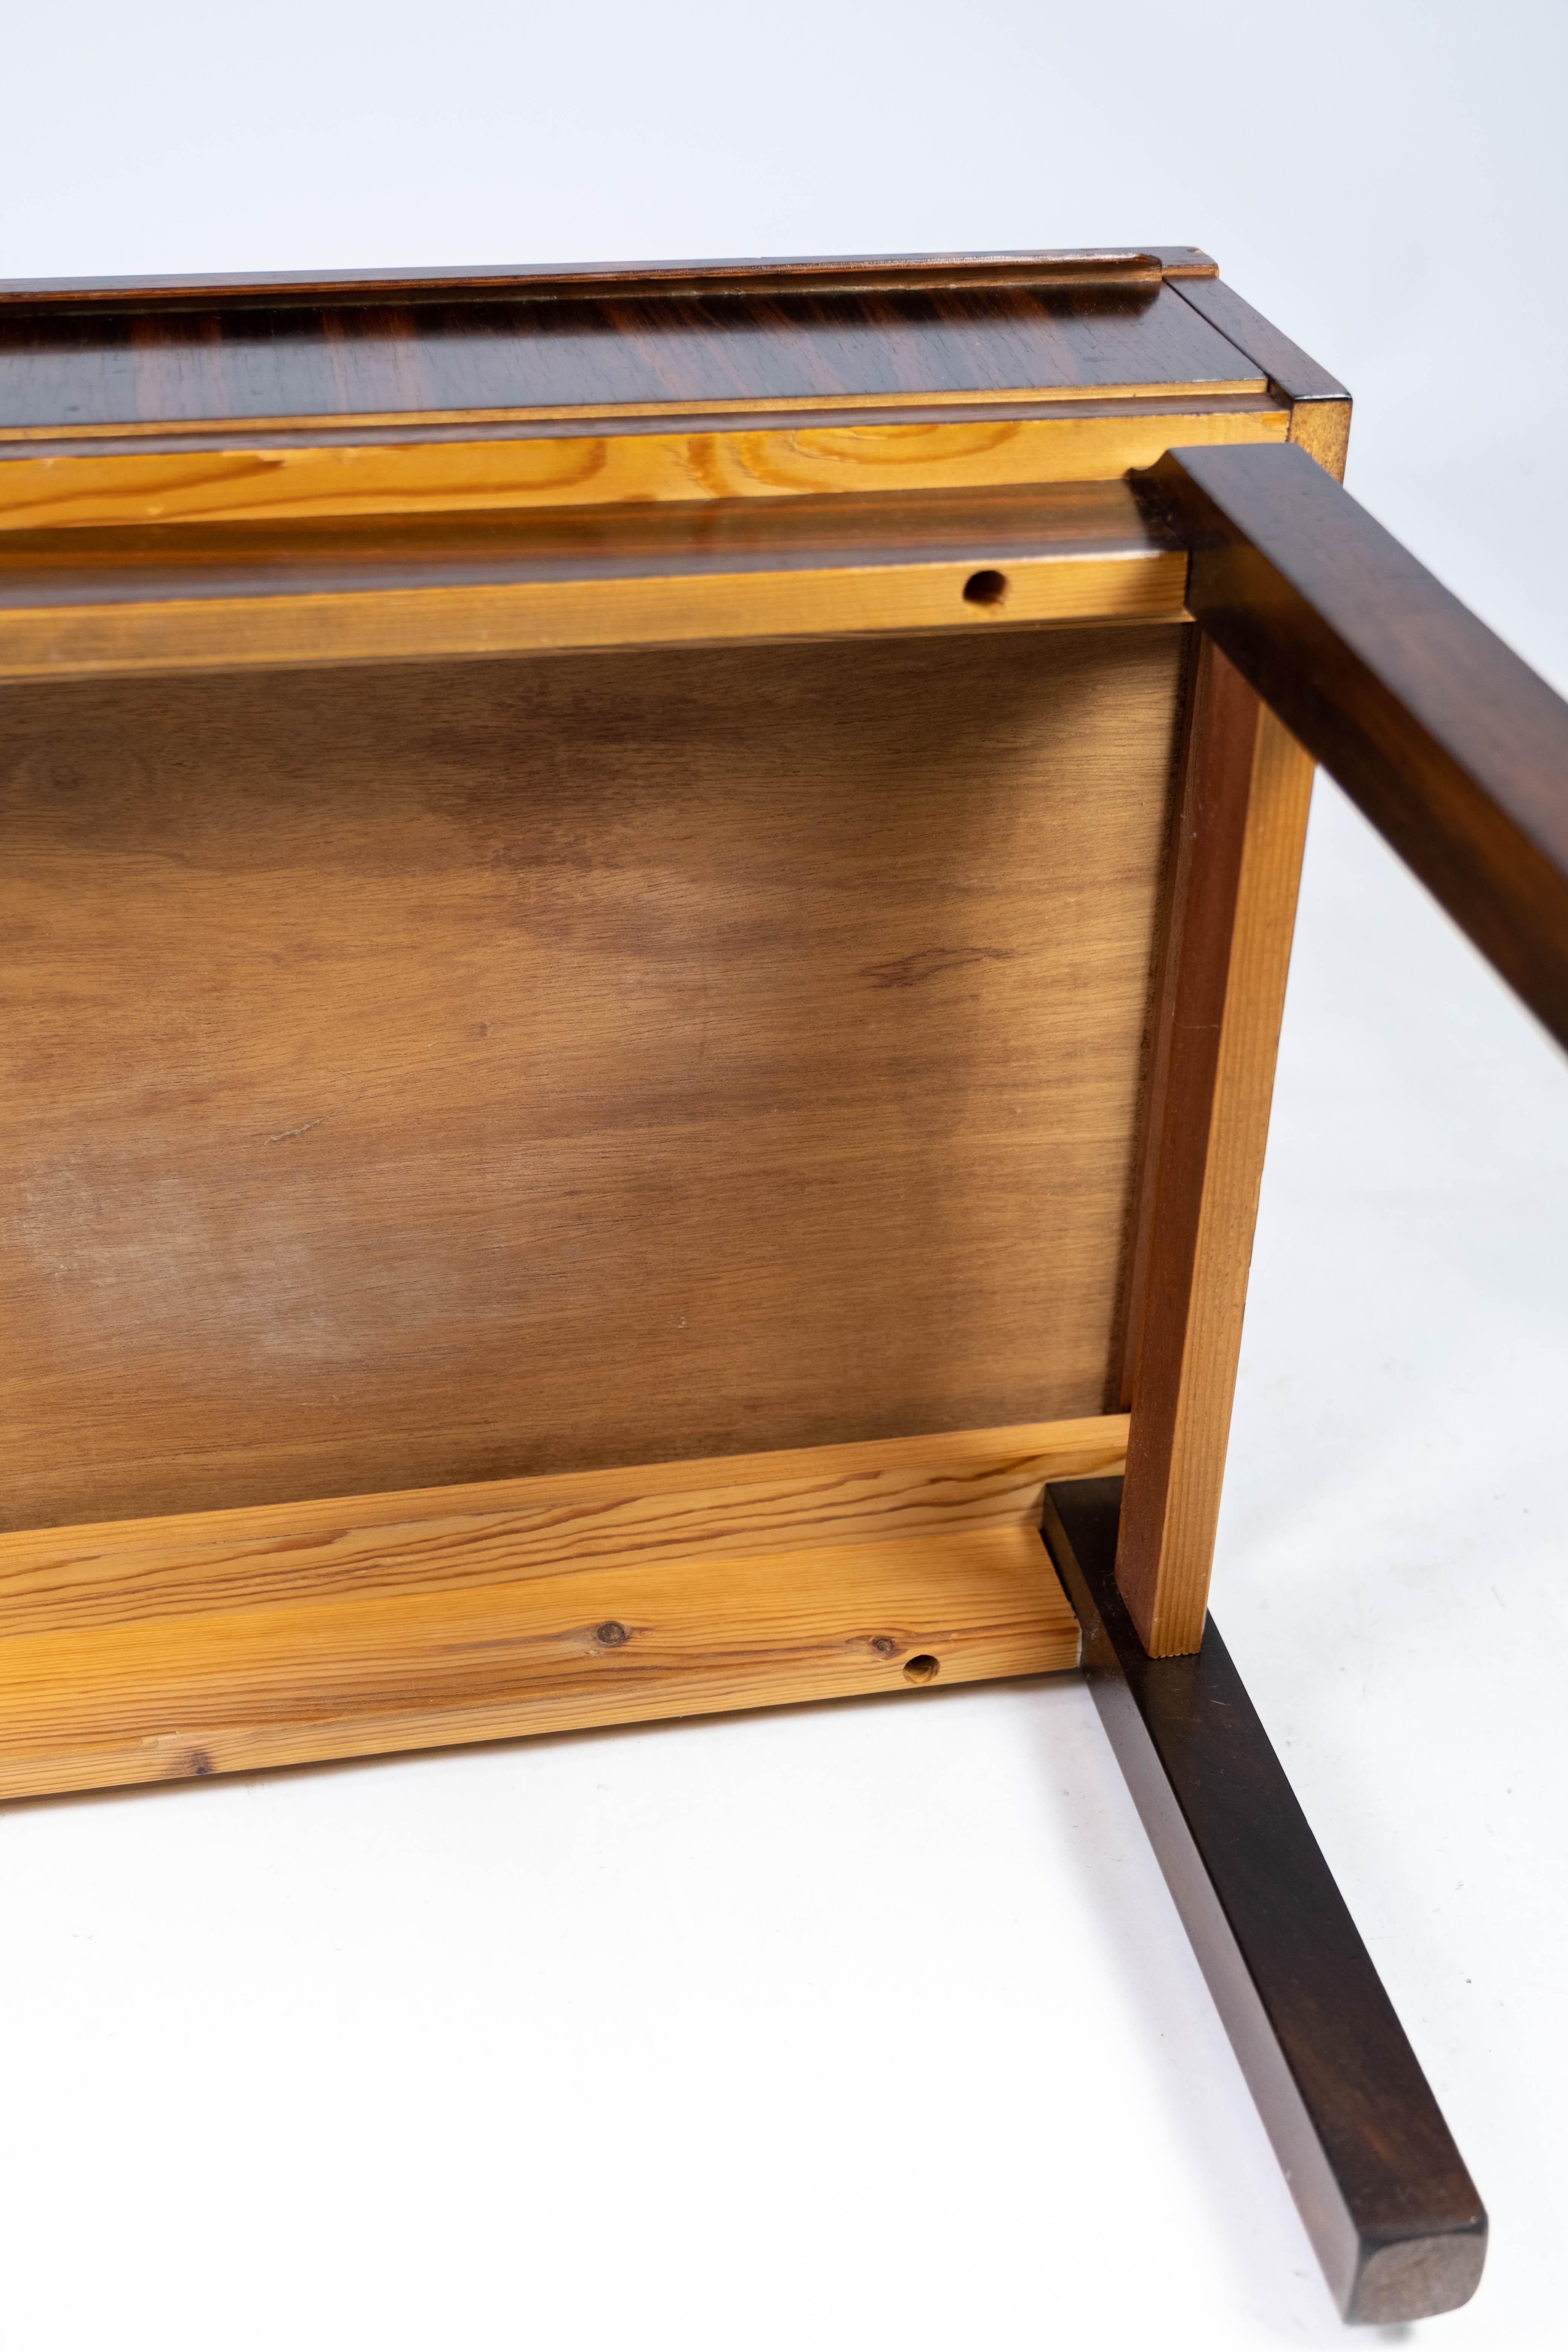 Low Chest in Rosewood and Tiles, of Danish Design from the 1960s For Sale 10